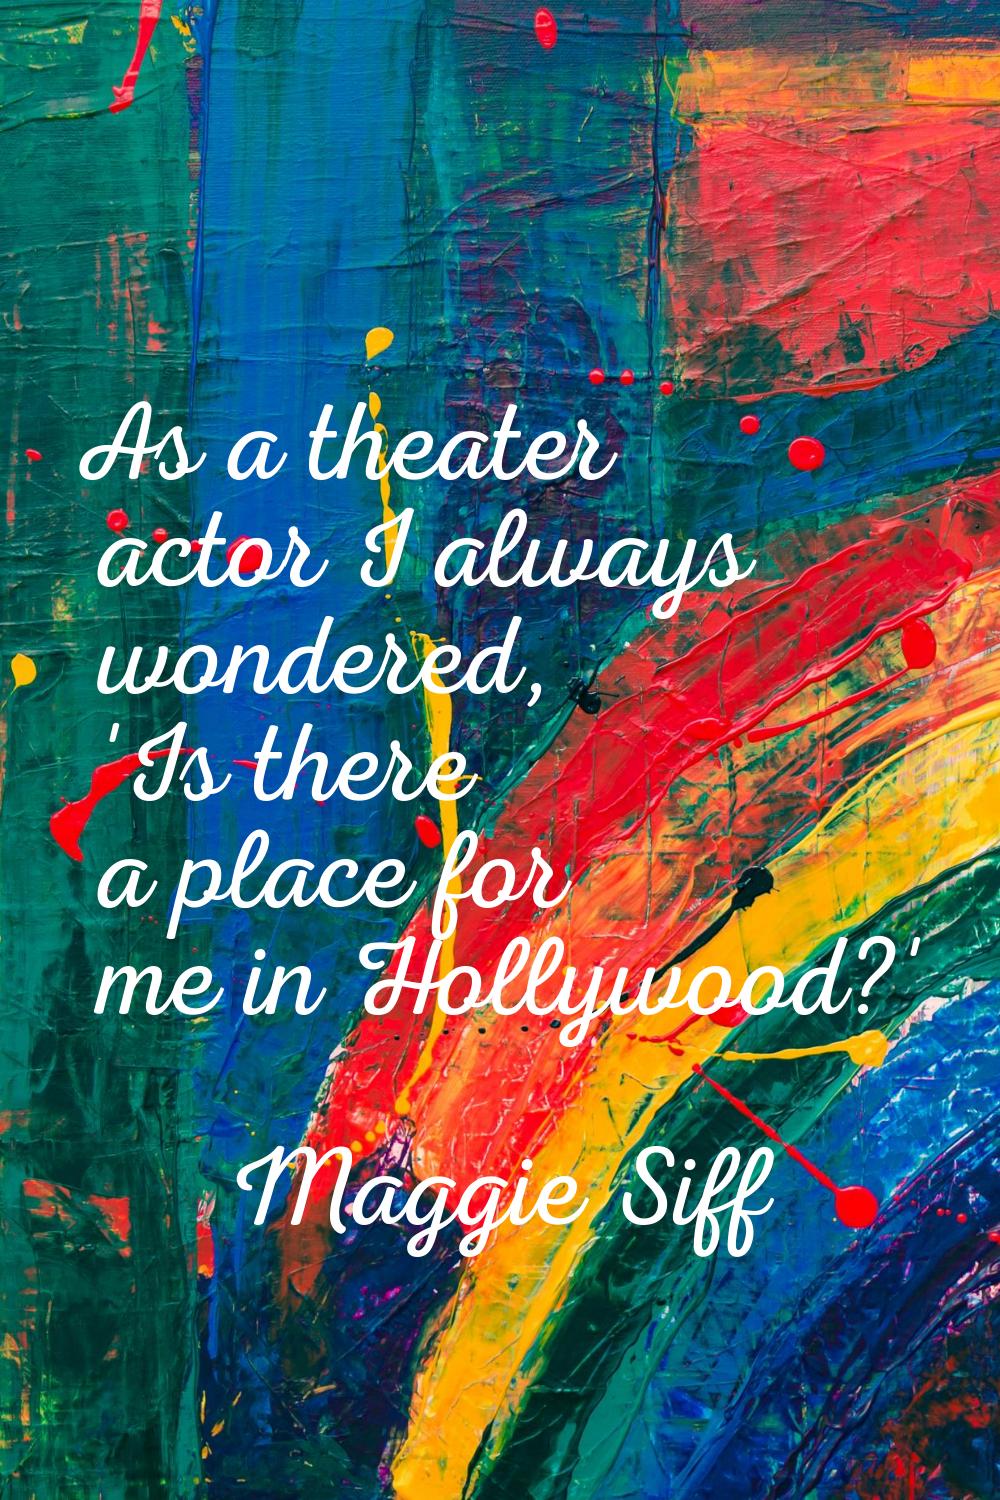 As a theater actor I always wondered, 'Is there a place for me in Hollywood?'